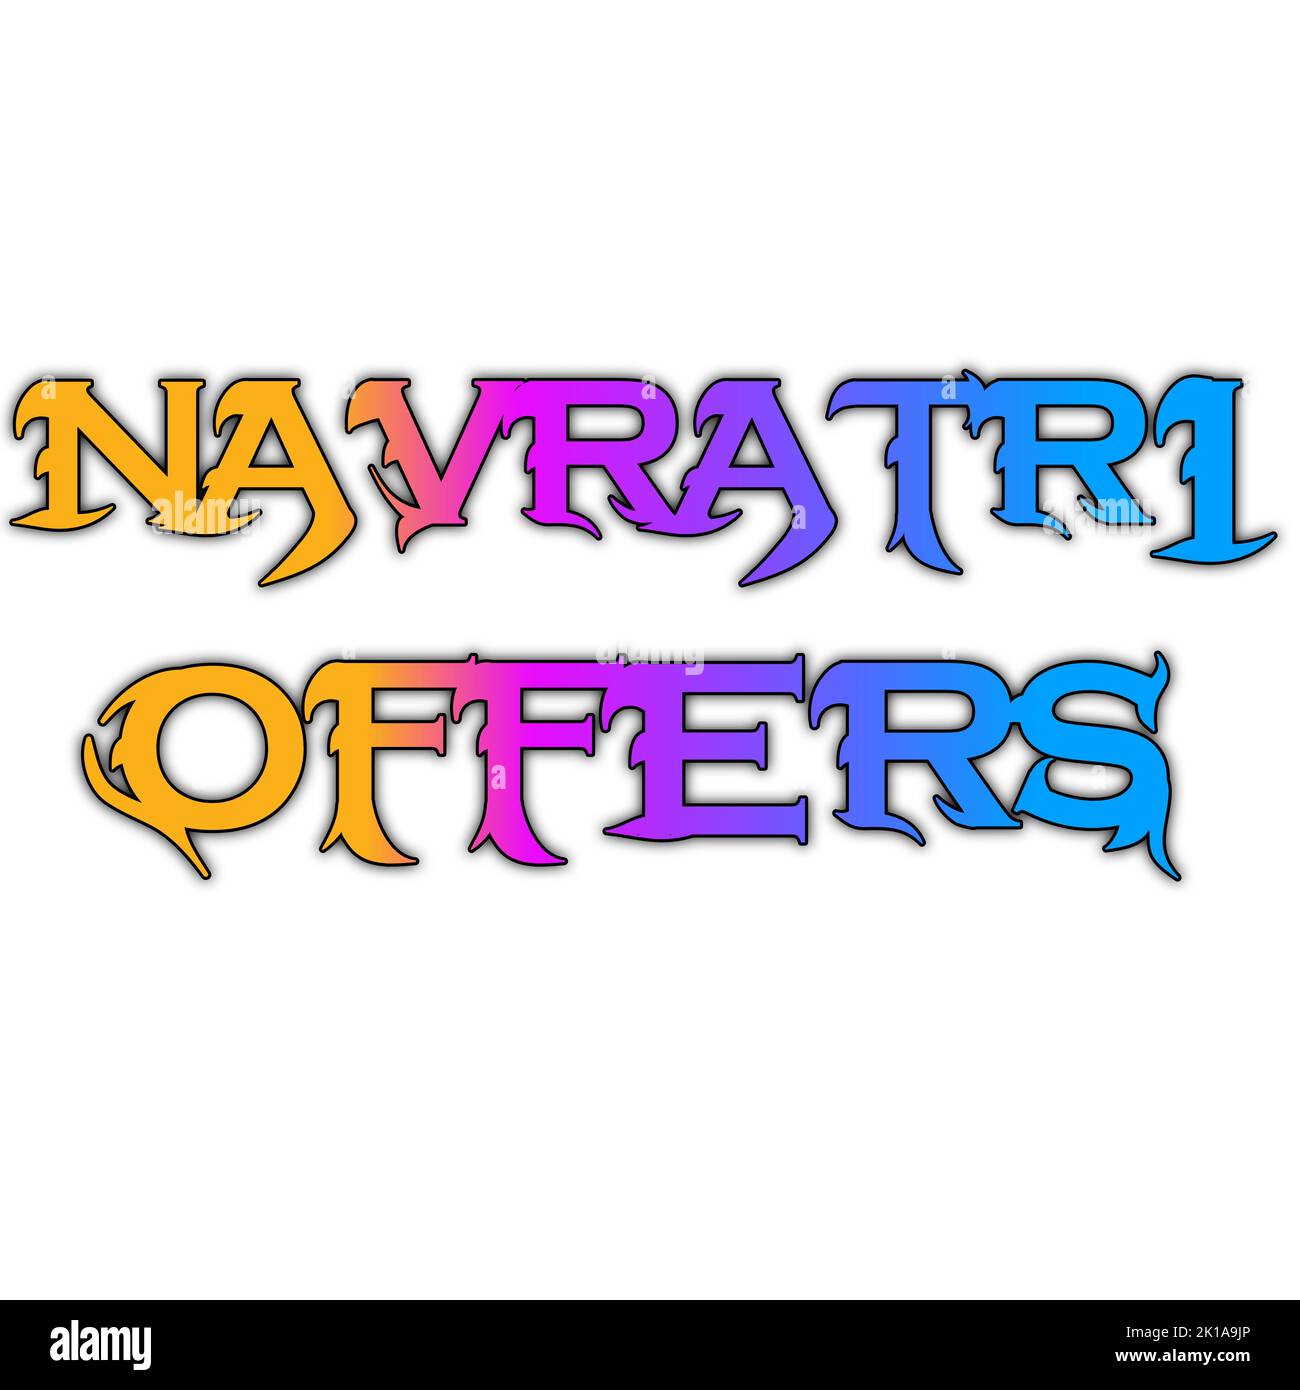 Navratri Cut Out Stock Images & Pictures - Alamy